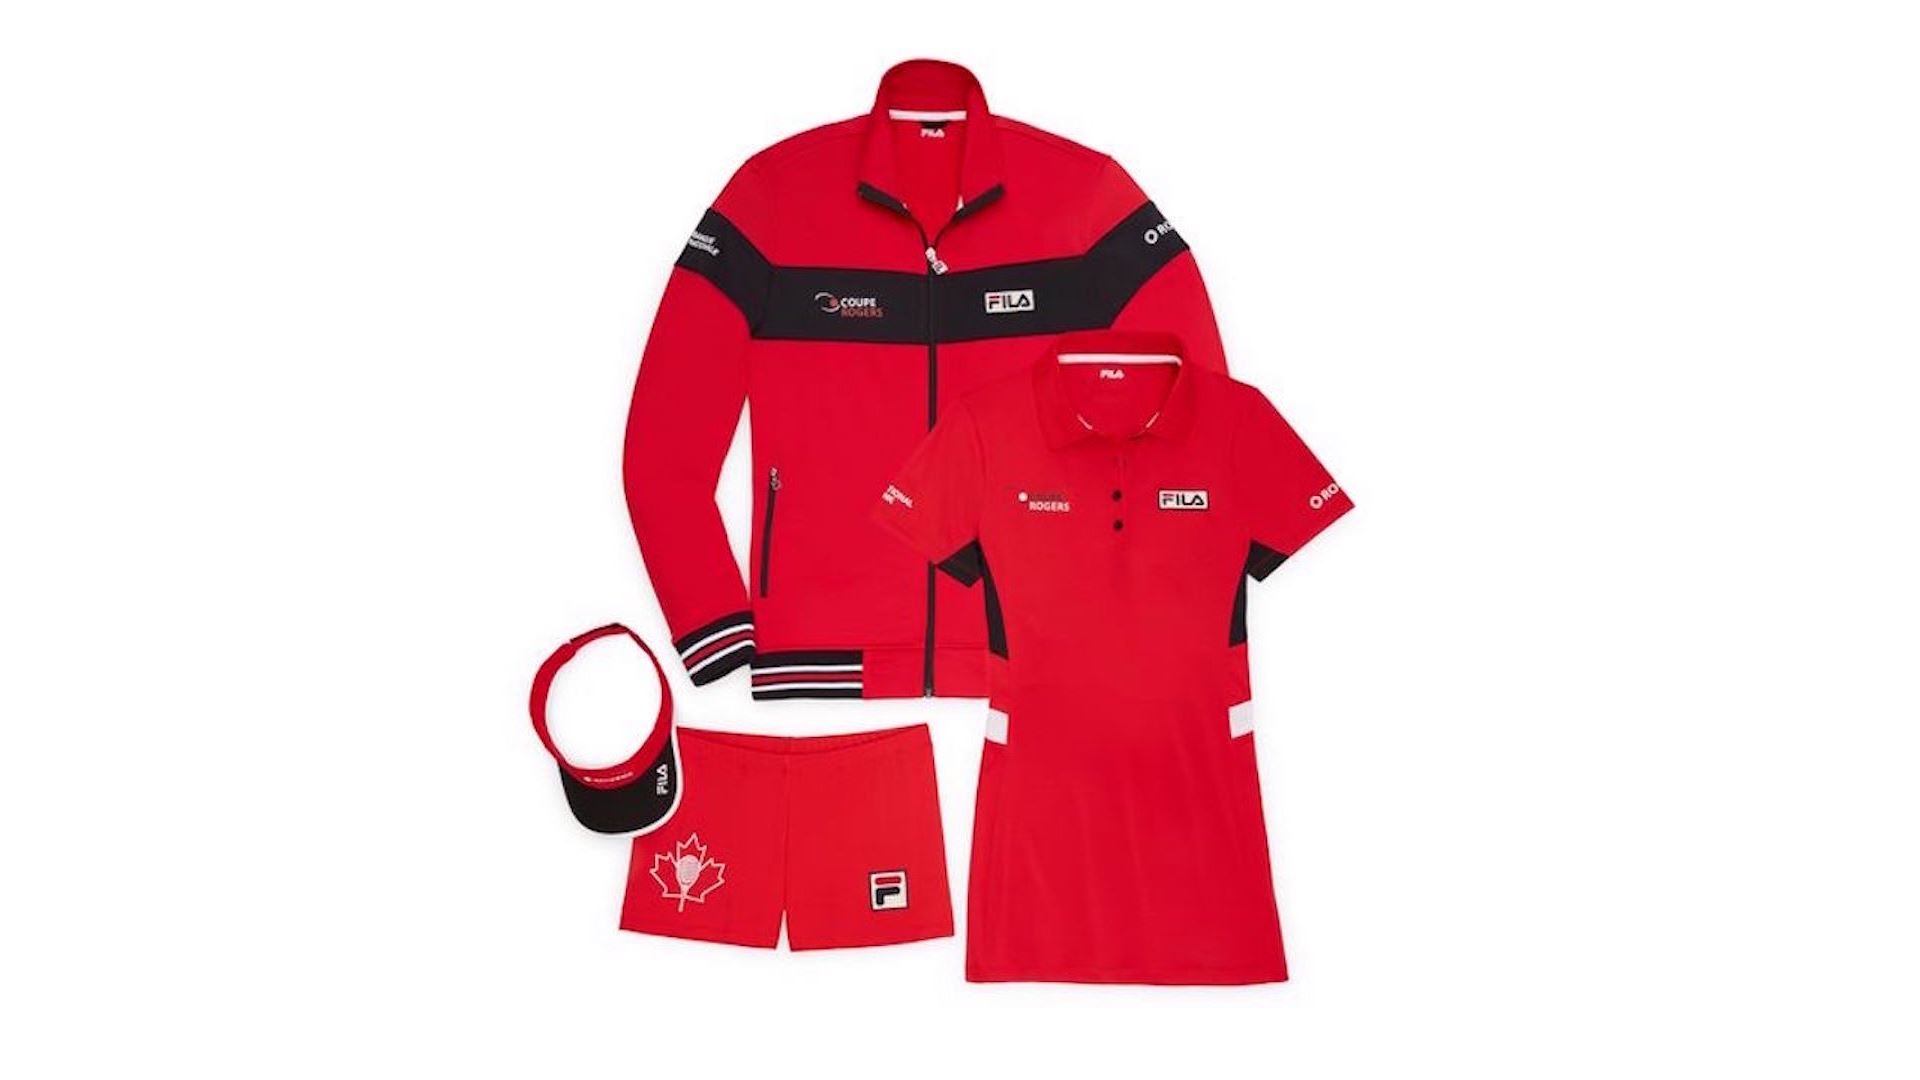 FILA Debuts New Uniform Collection for Rogers Cup Presented by National Bank in Toronto and Montreal